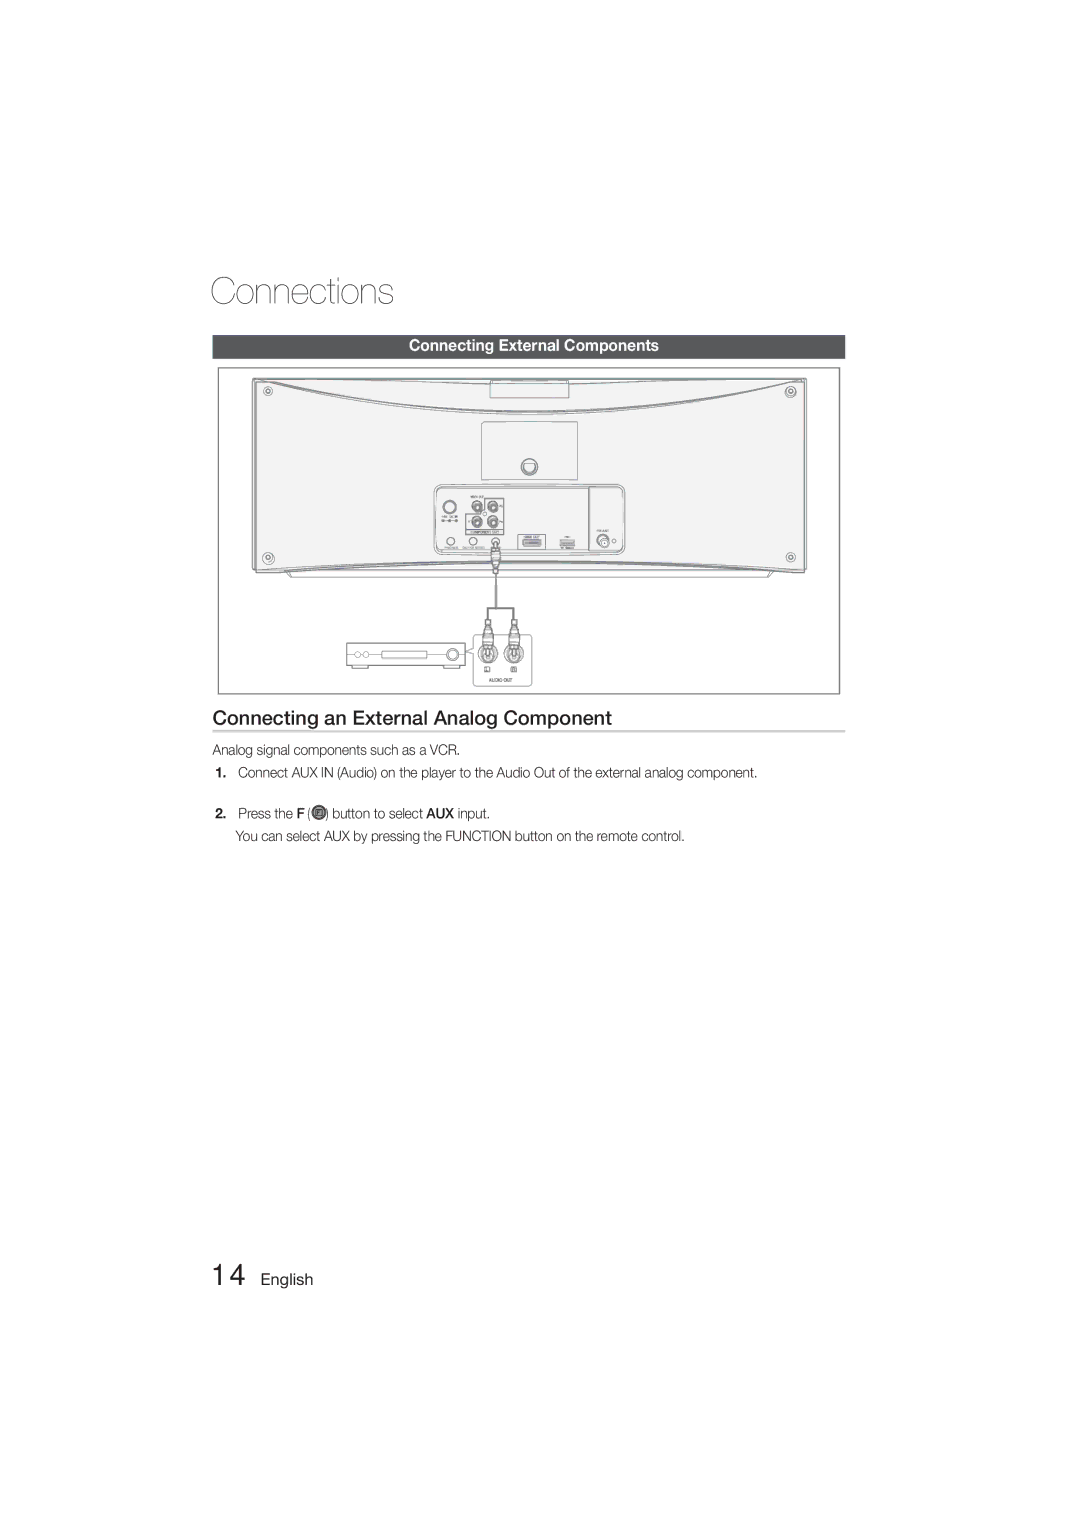 Samsung MM-D470D/ZF, MM-D470D/XN, MM-D470D/EN manual Connecting an External Analog Component, Connecting External Components 